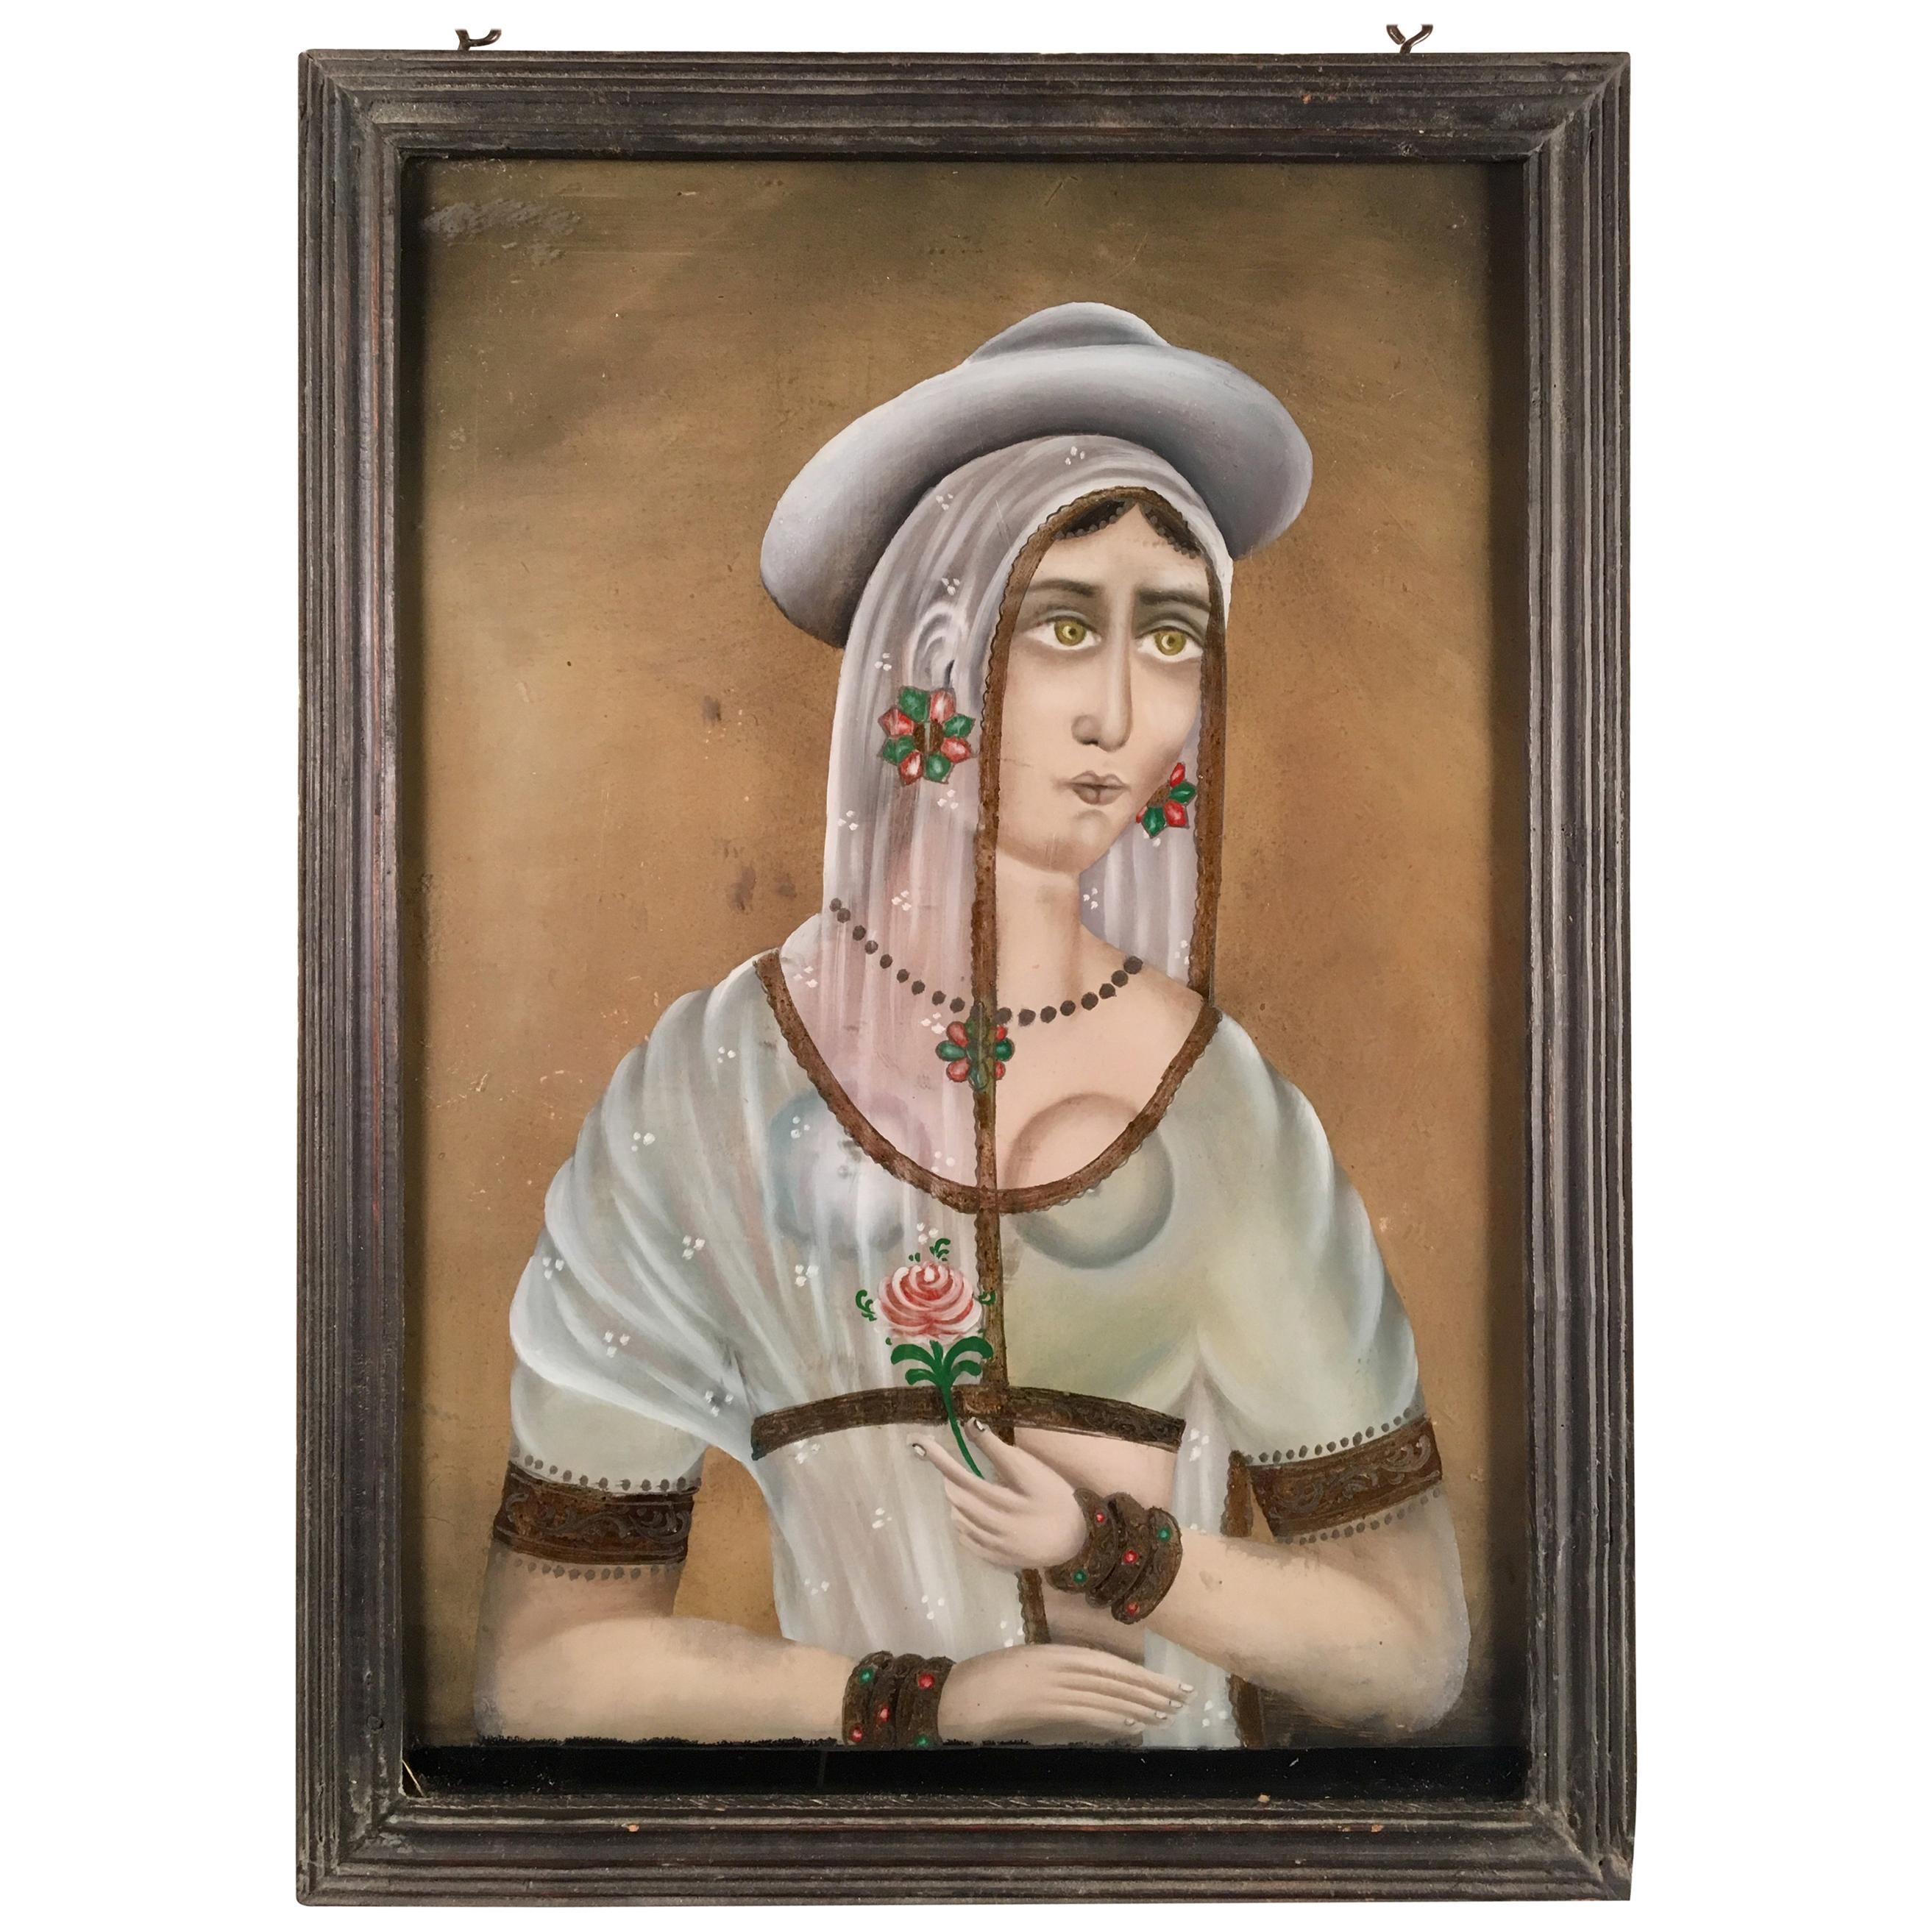 Reverse Painting on Glass, Portrait of a Woman, India, 19th Century